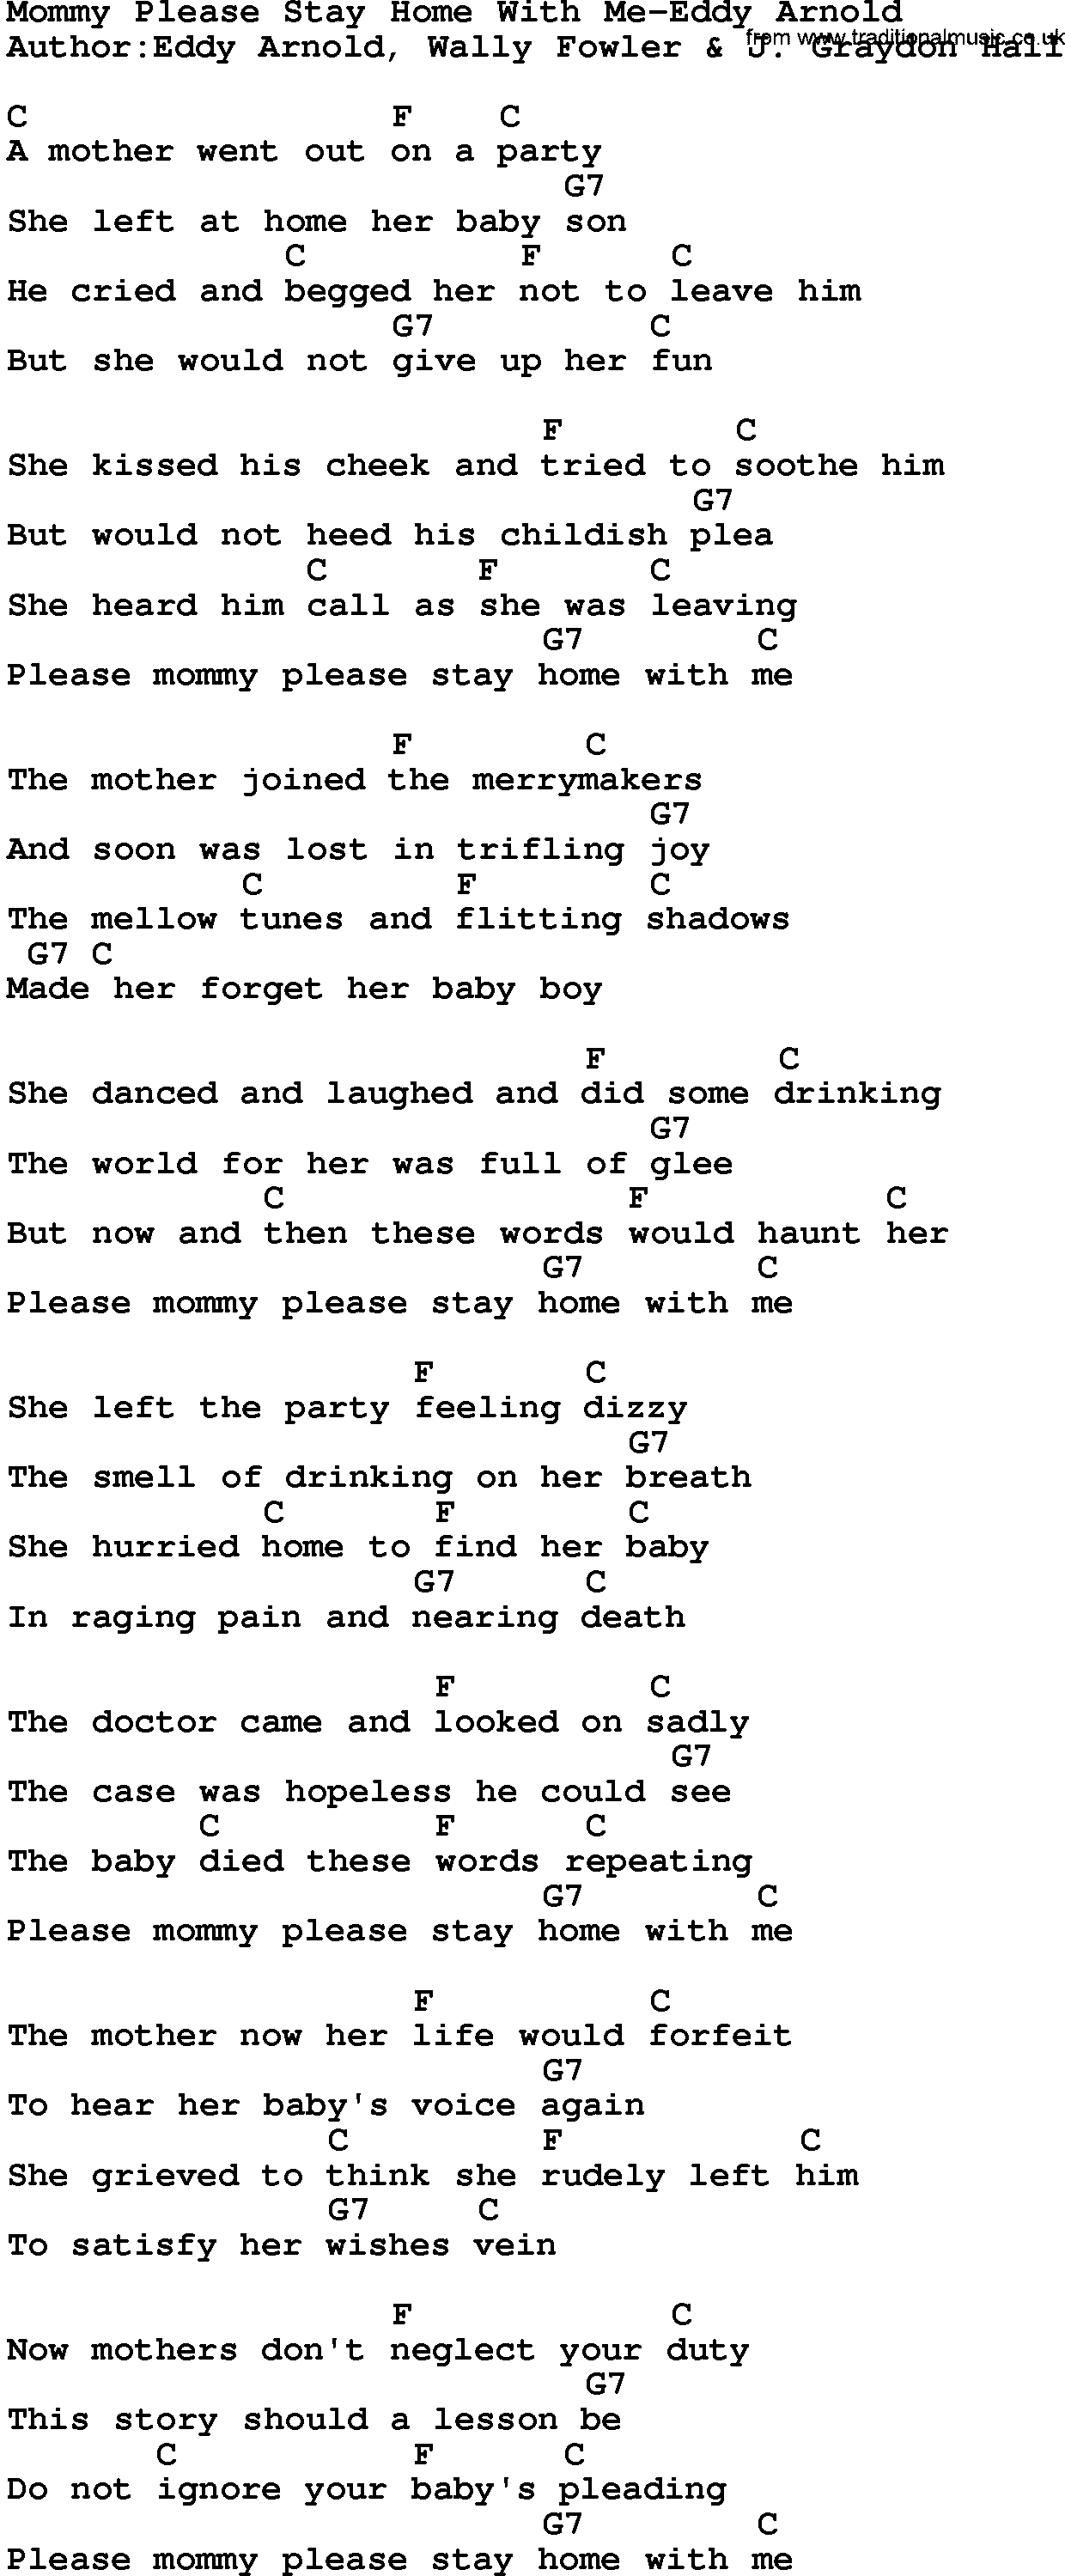 Country music song: Mommy Please Stay Home With Me-Eddy Arnold lyrics and chords